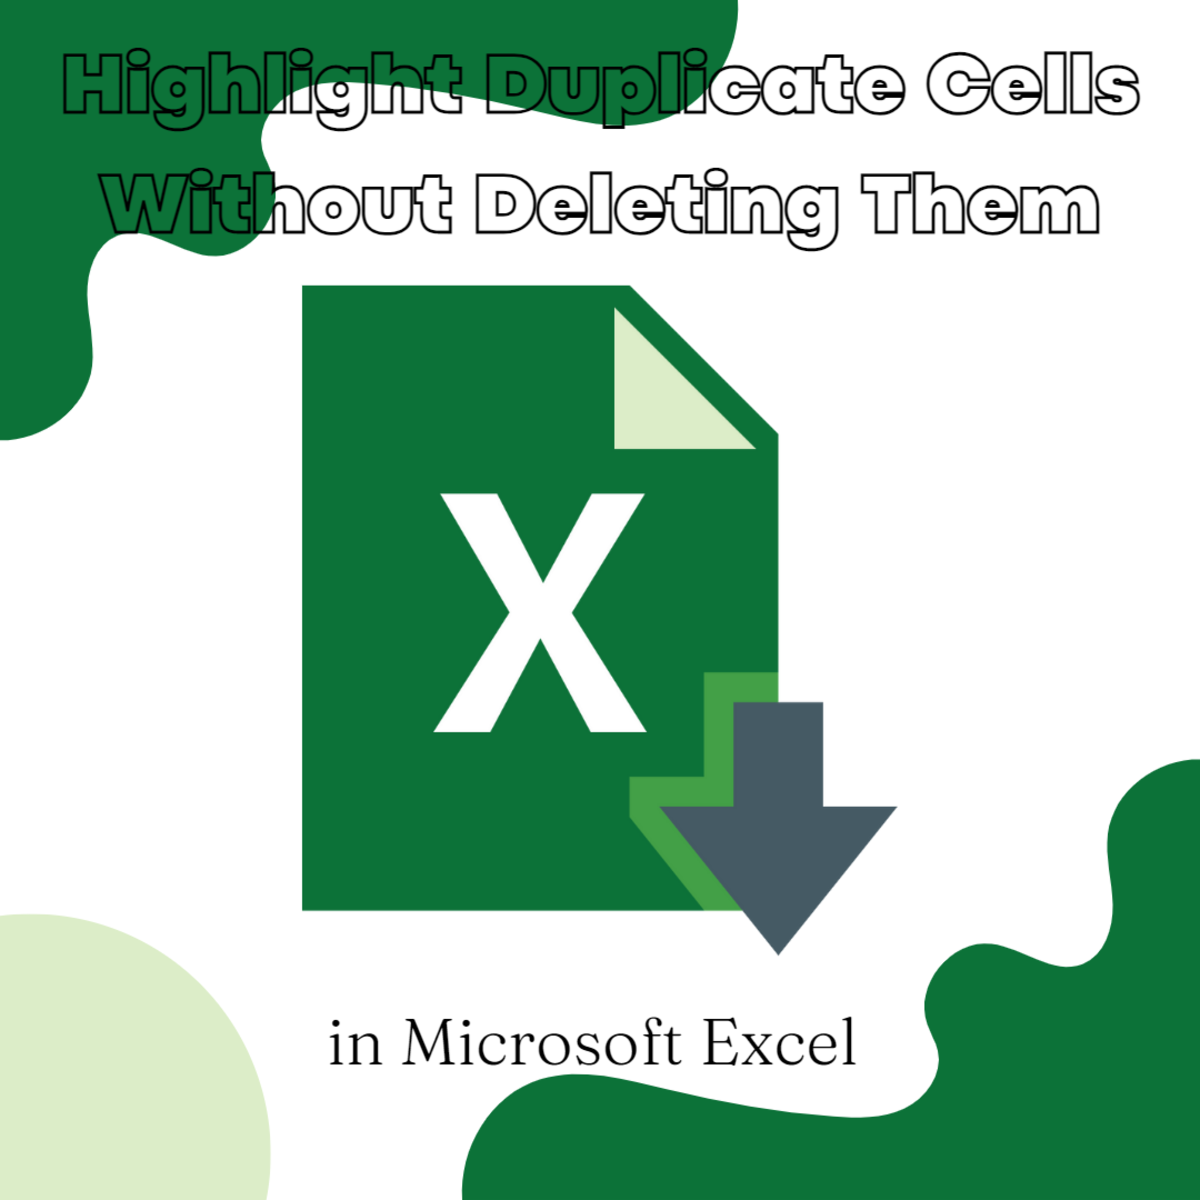 MS Excel Tutorial: How to Highlight Duplicate Values in Microsoft Excel Without Deleting Them